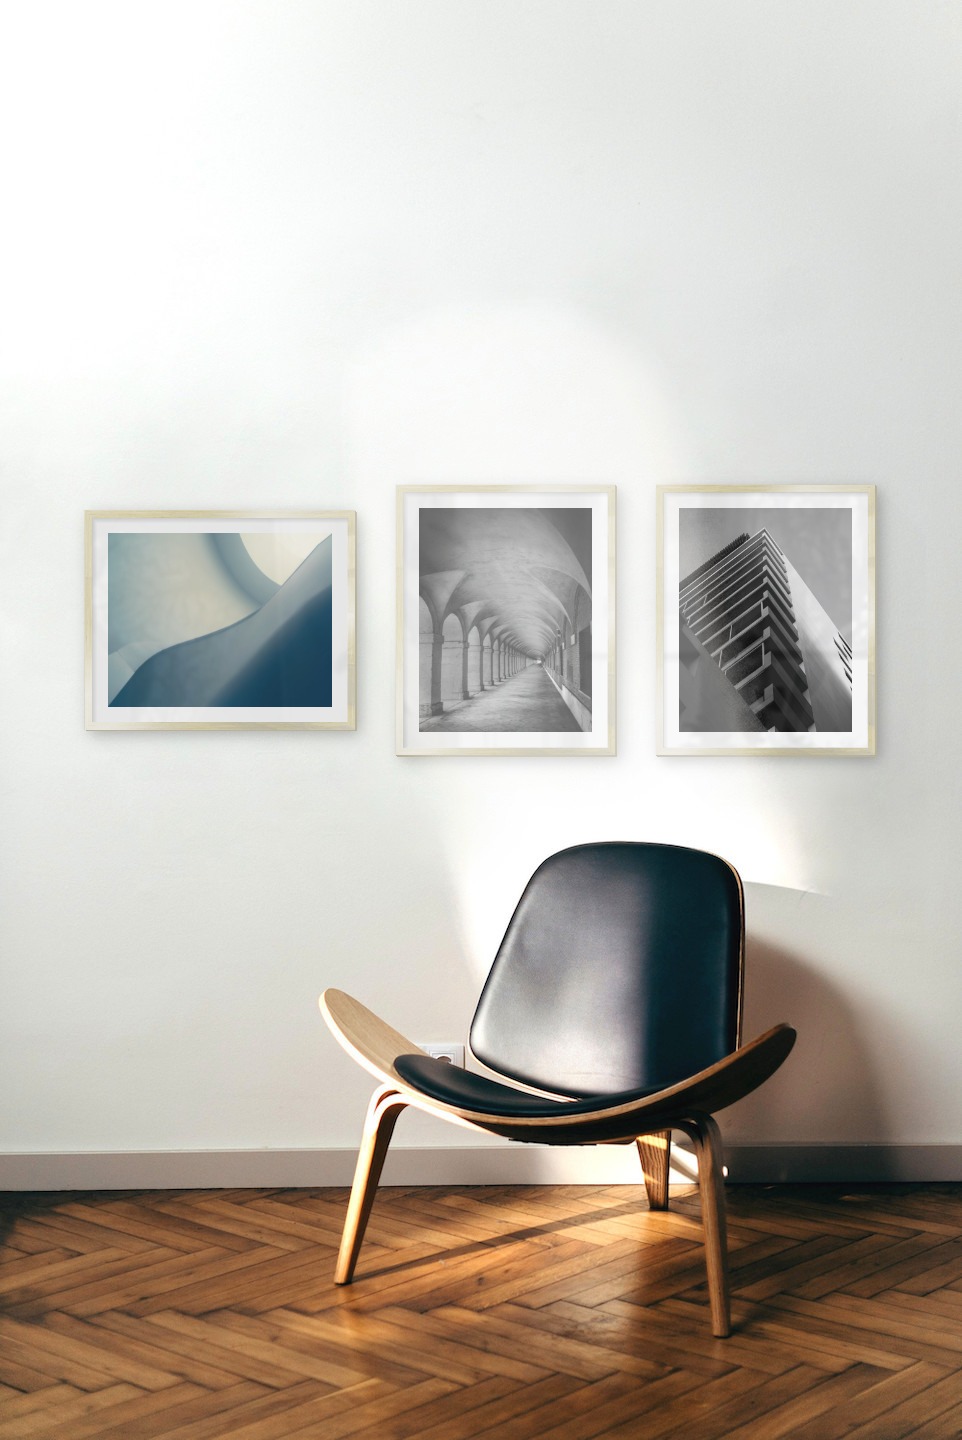 Gallery wall with picture frames in gold in sizes 40x50 with prints "Blue geometry", "Hallway with pillars and arches" and "Black and white building"